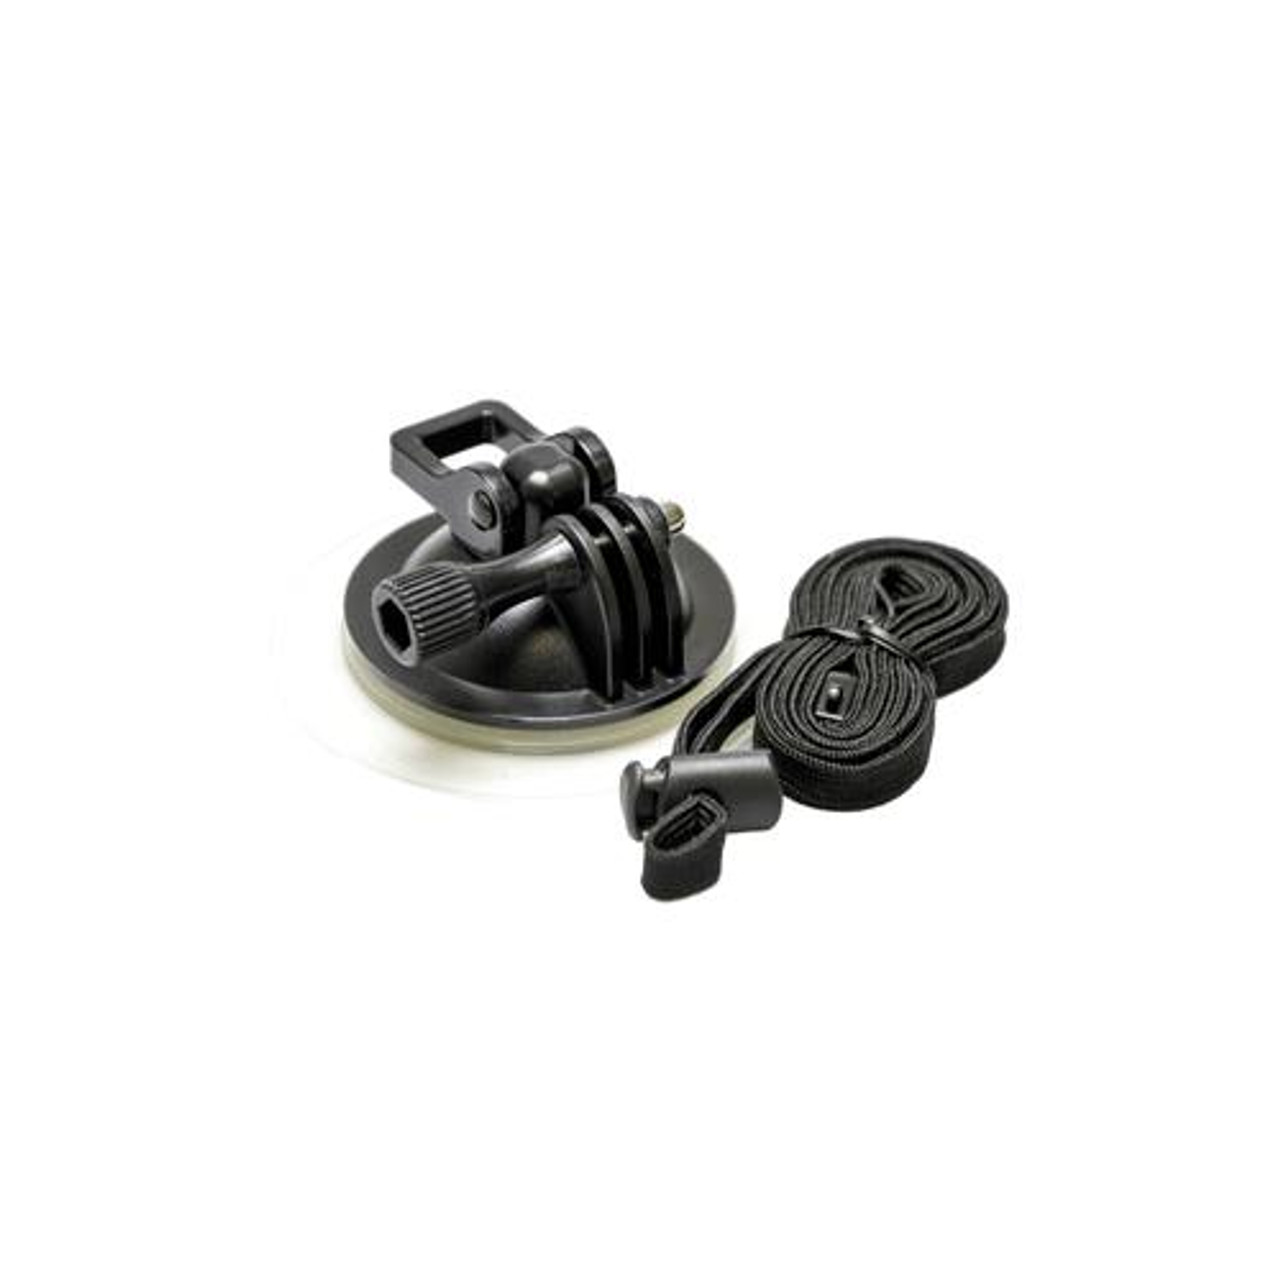 Surfstow Suction Cup/Tether (R-58504) Road Entertainment